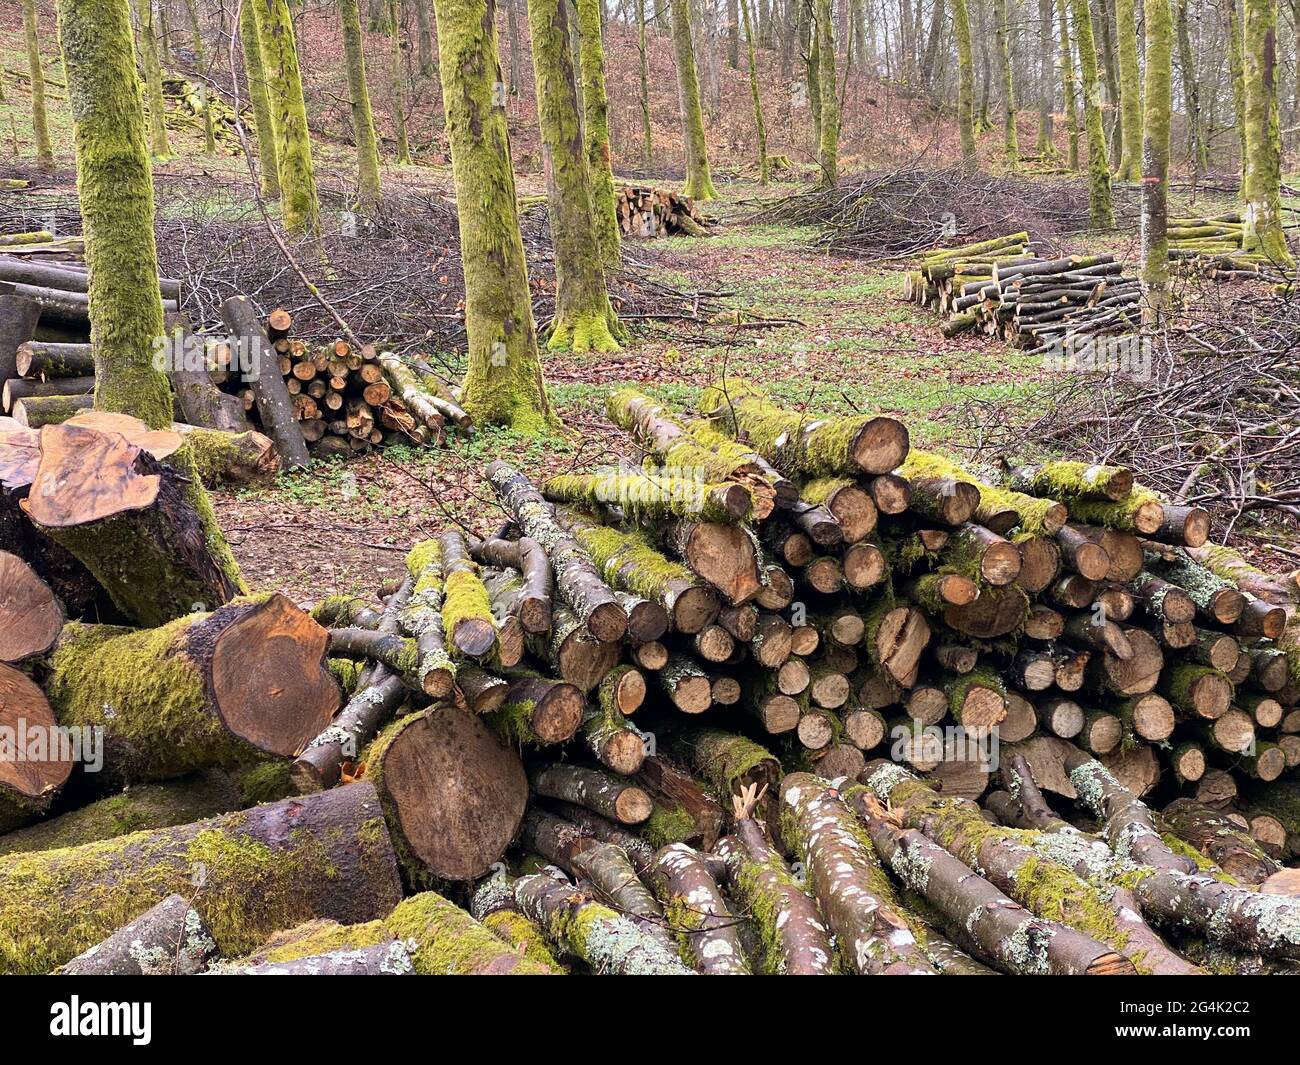 forest management, Forestry work, in a broadleaf forest, Stack of cut tree logs in a Virton forest, Luxembourg, Belgium Stock Photo